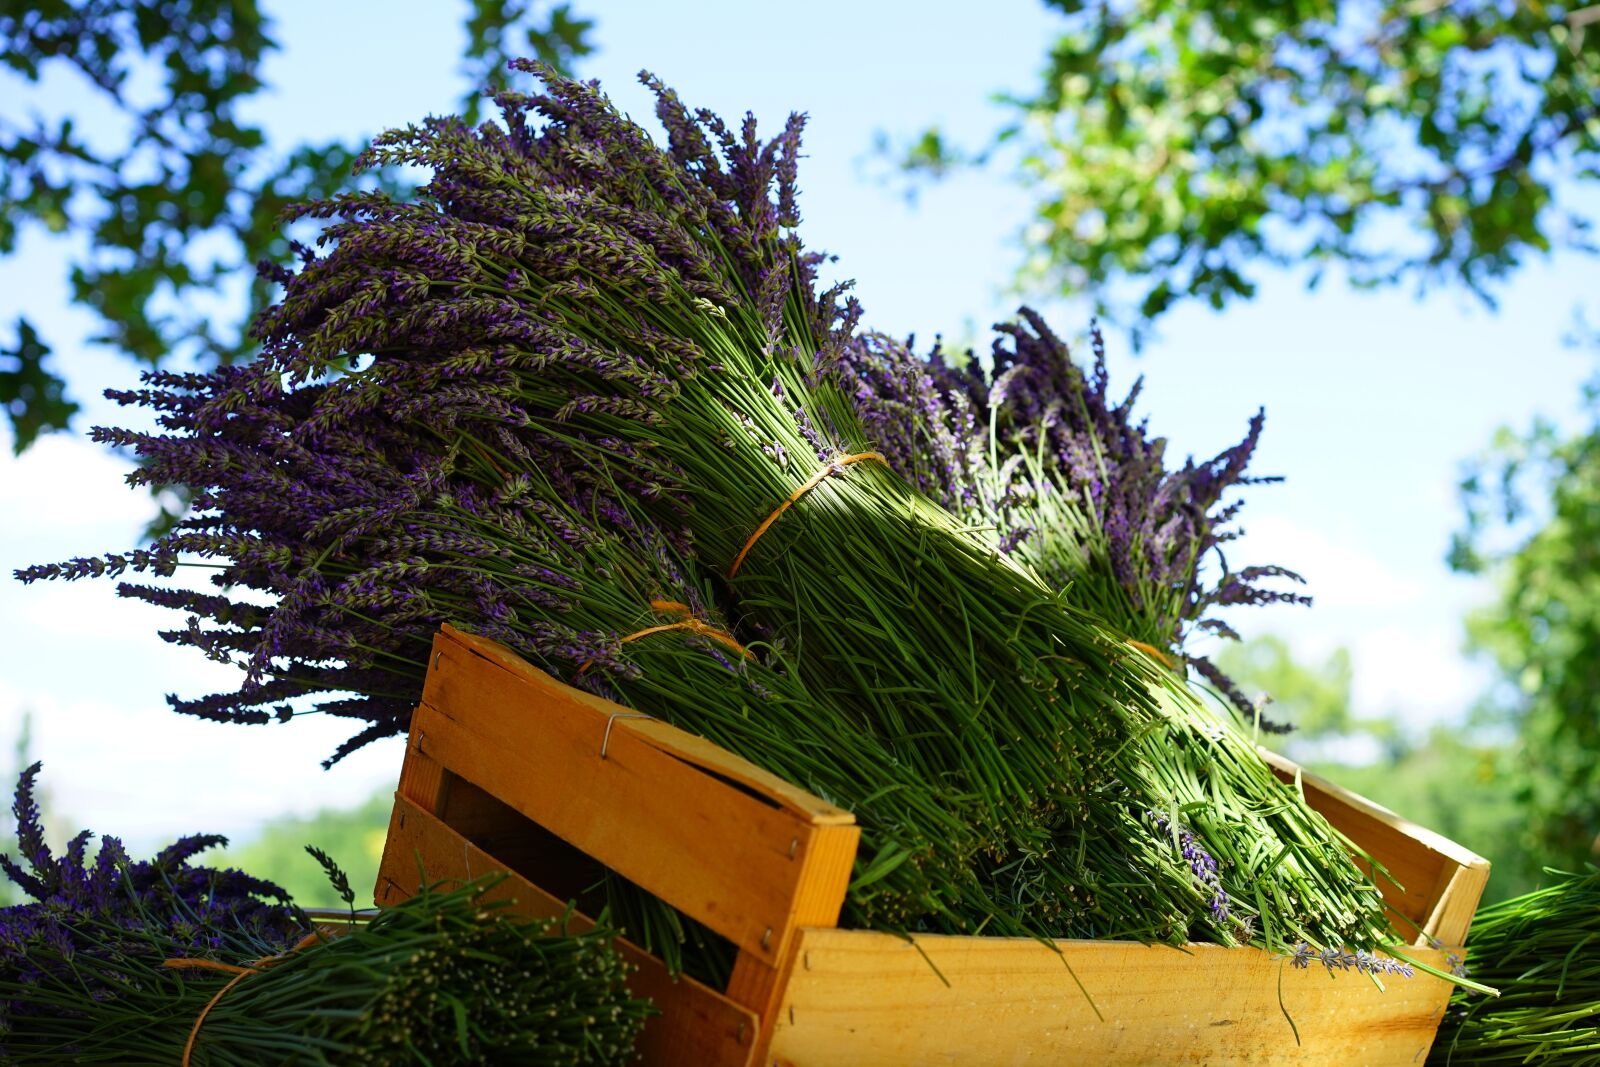 Sony a7 sample photo. Lavender, tufts, sale photography